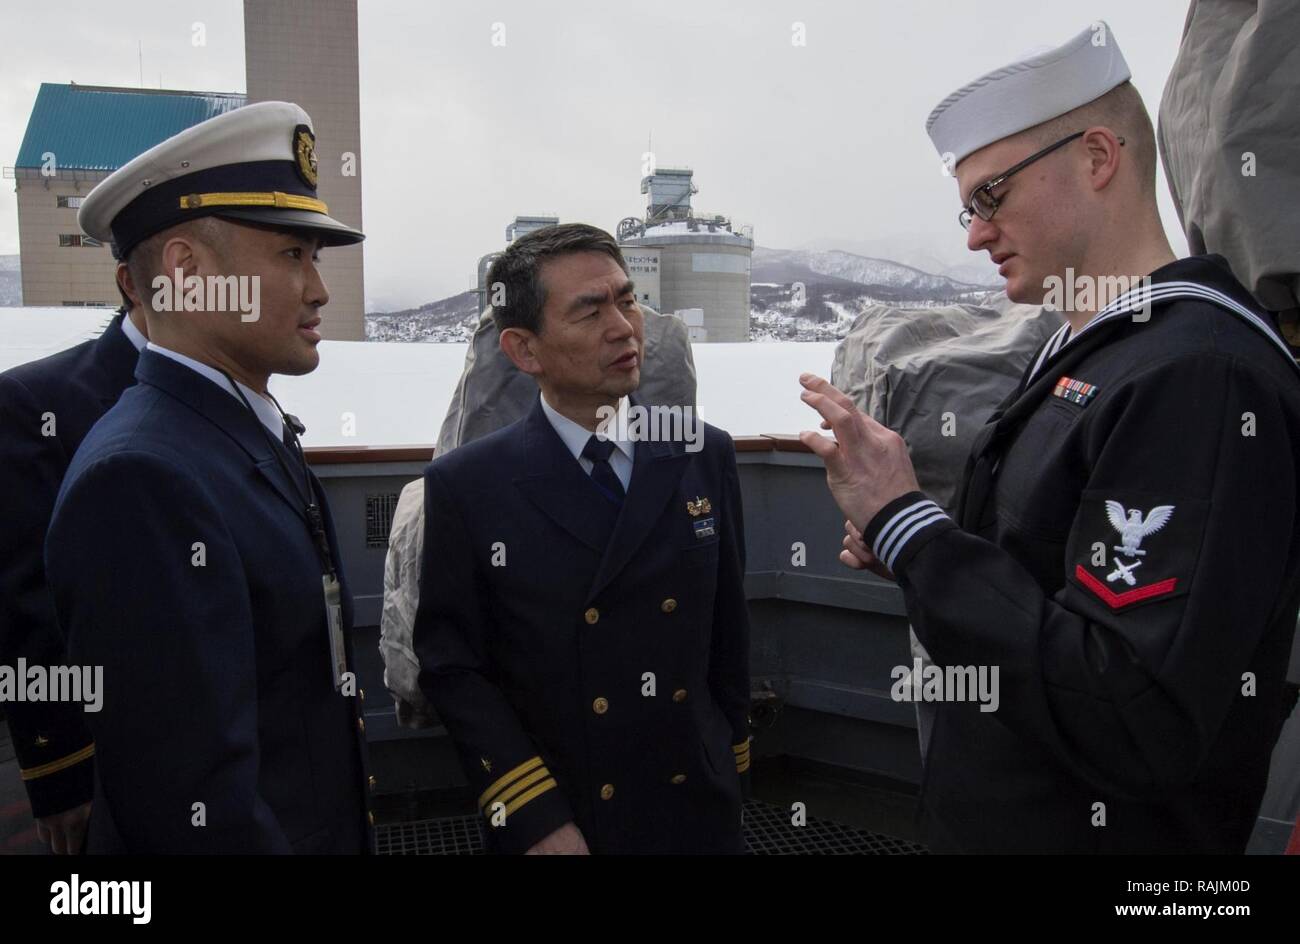 OTARU, Japan (Feb. 04, 2017) Gunner’s Mate 3rd Class Austin Aumiller, assigned to the forward-deployed Arleigh Burke-class guided-missile destroyer USS McCampbell (DDG 85), gives a tour of the ship to members of Japan Coast Guard after arriving at Otaru, Japan. McCampbell is on patrol in the 7th Fleet area of operations in support of security and stability in the Indo-Asia-Pacific region. Stock Photo